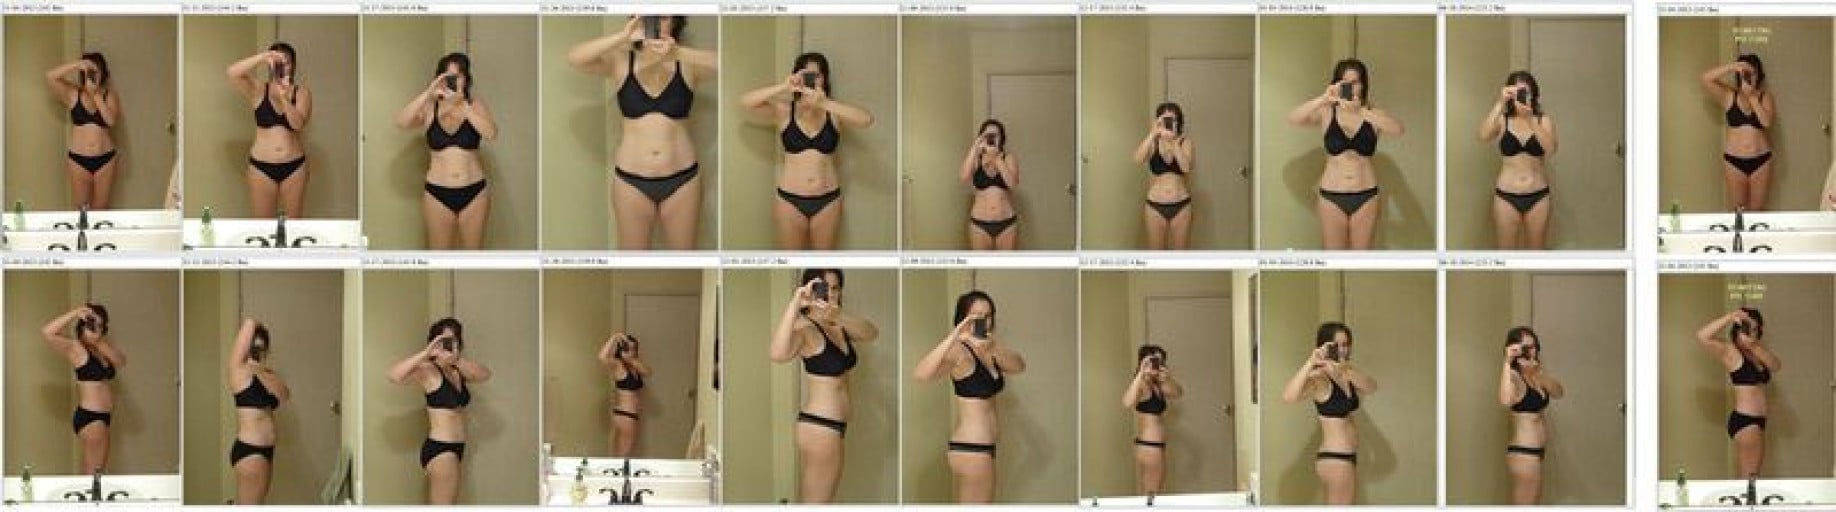 5 foot 4 Female 25 lbs Weight Loss Before and After 148 lbs to 123 lbs